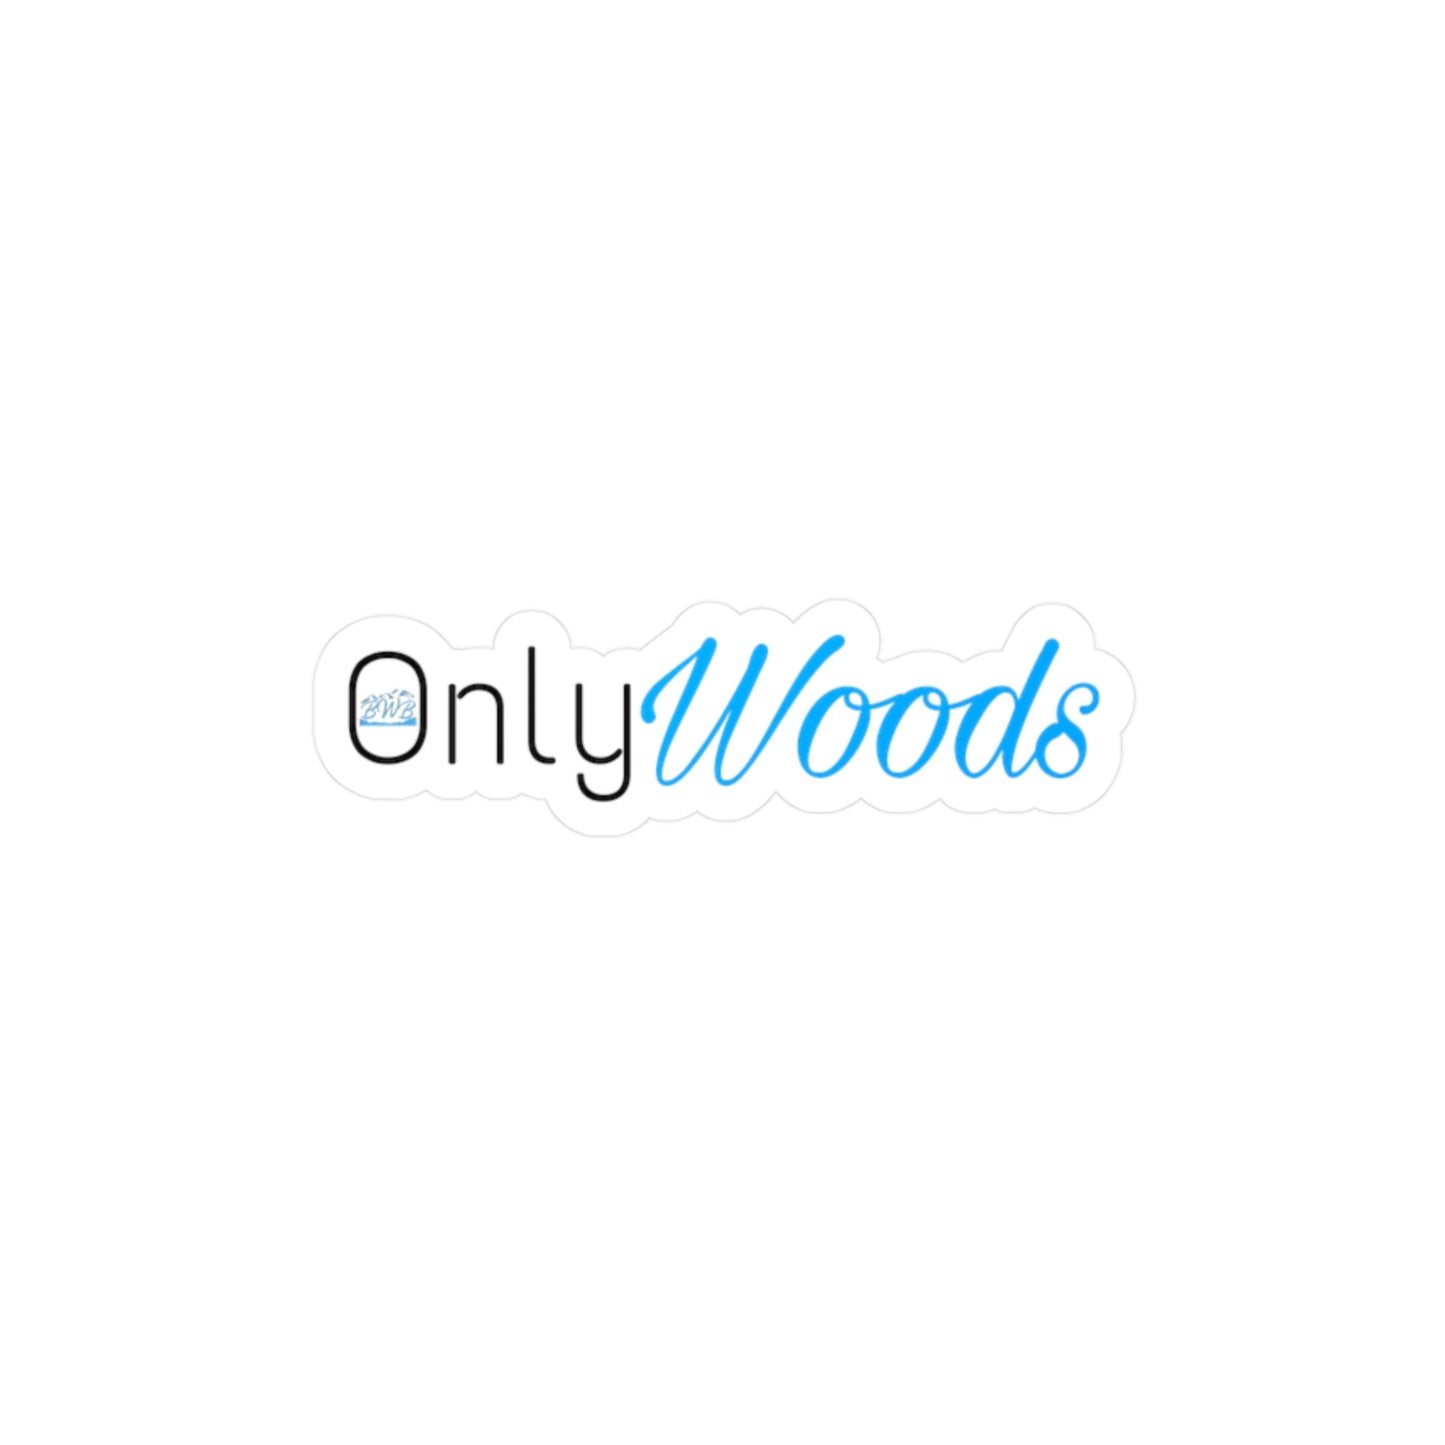 OnlyWoods Decal - Backwoods Branding Co.